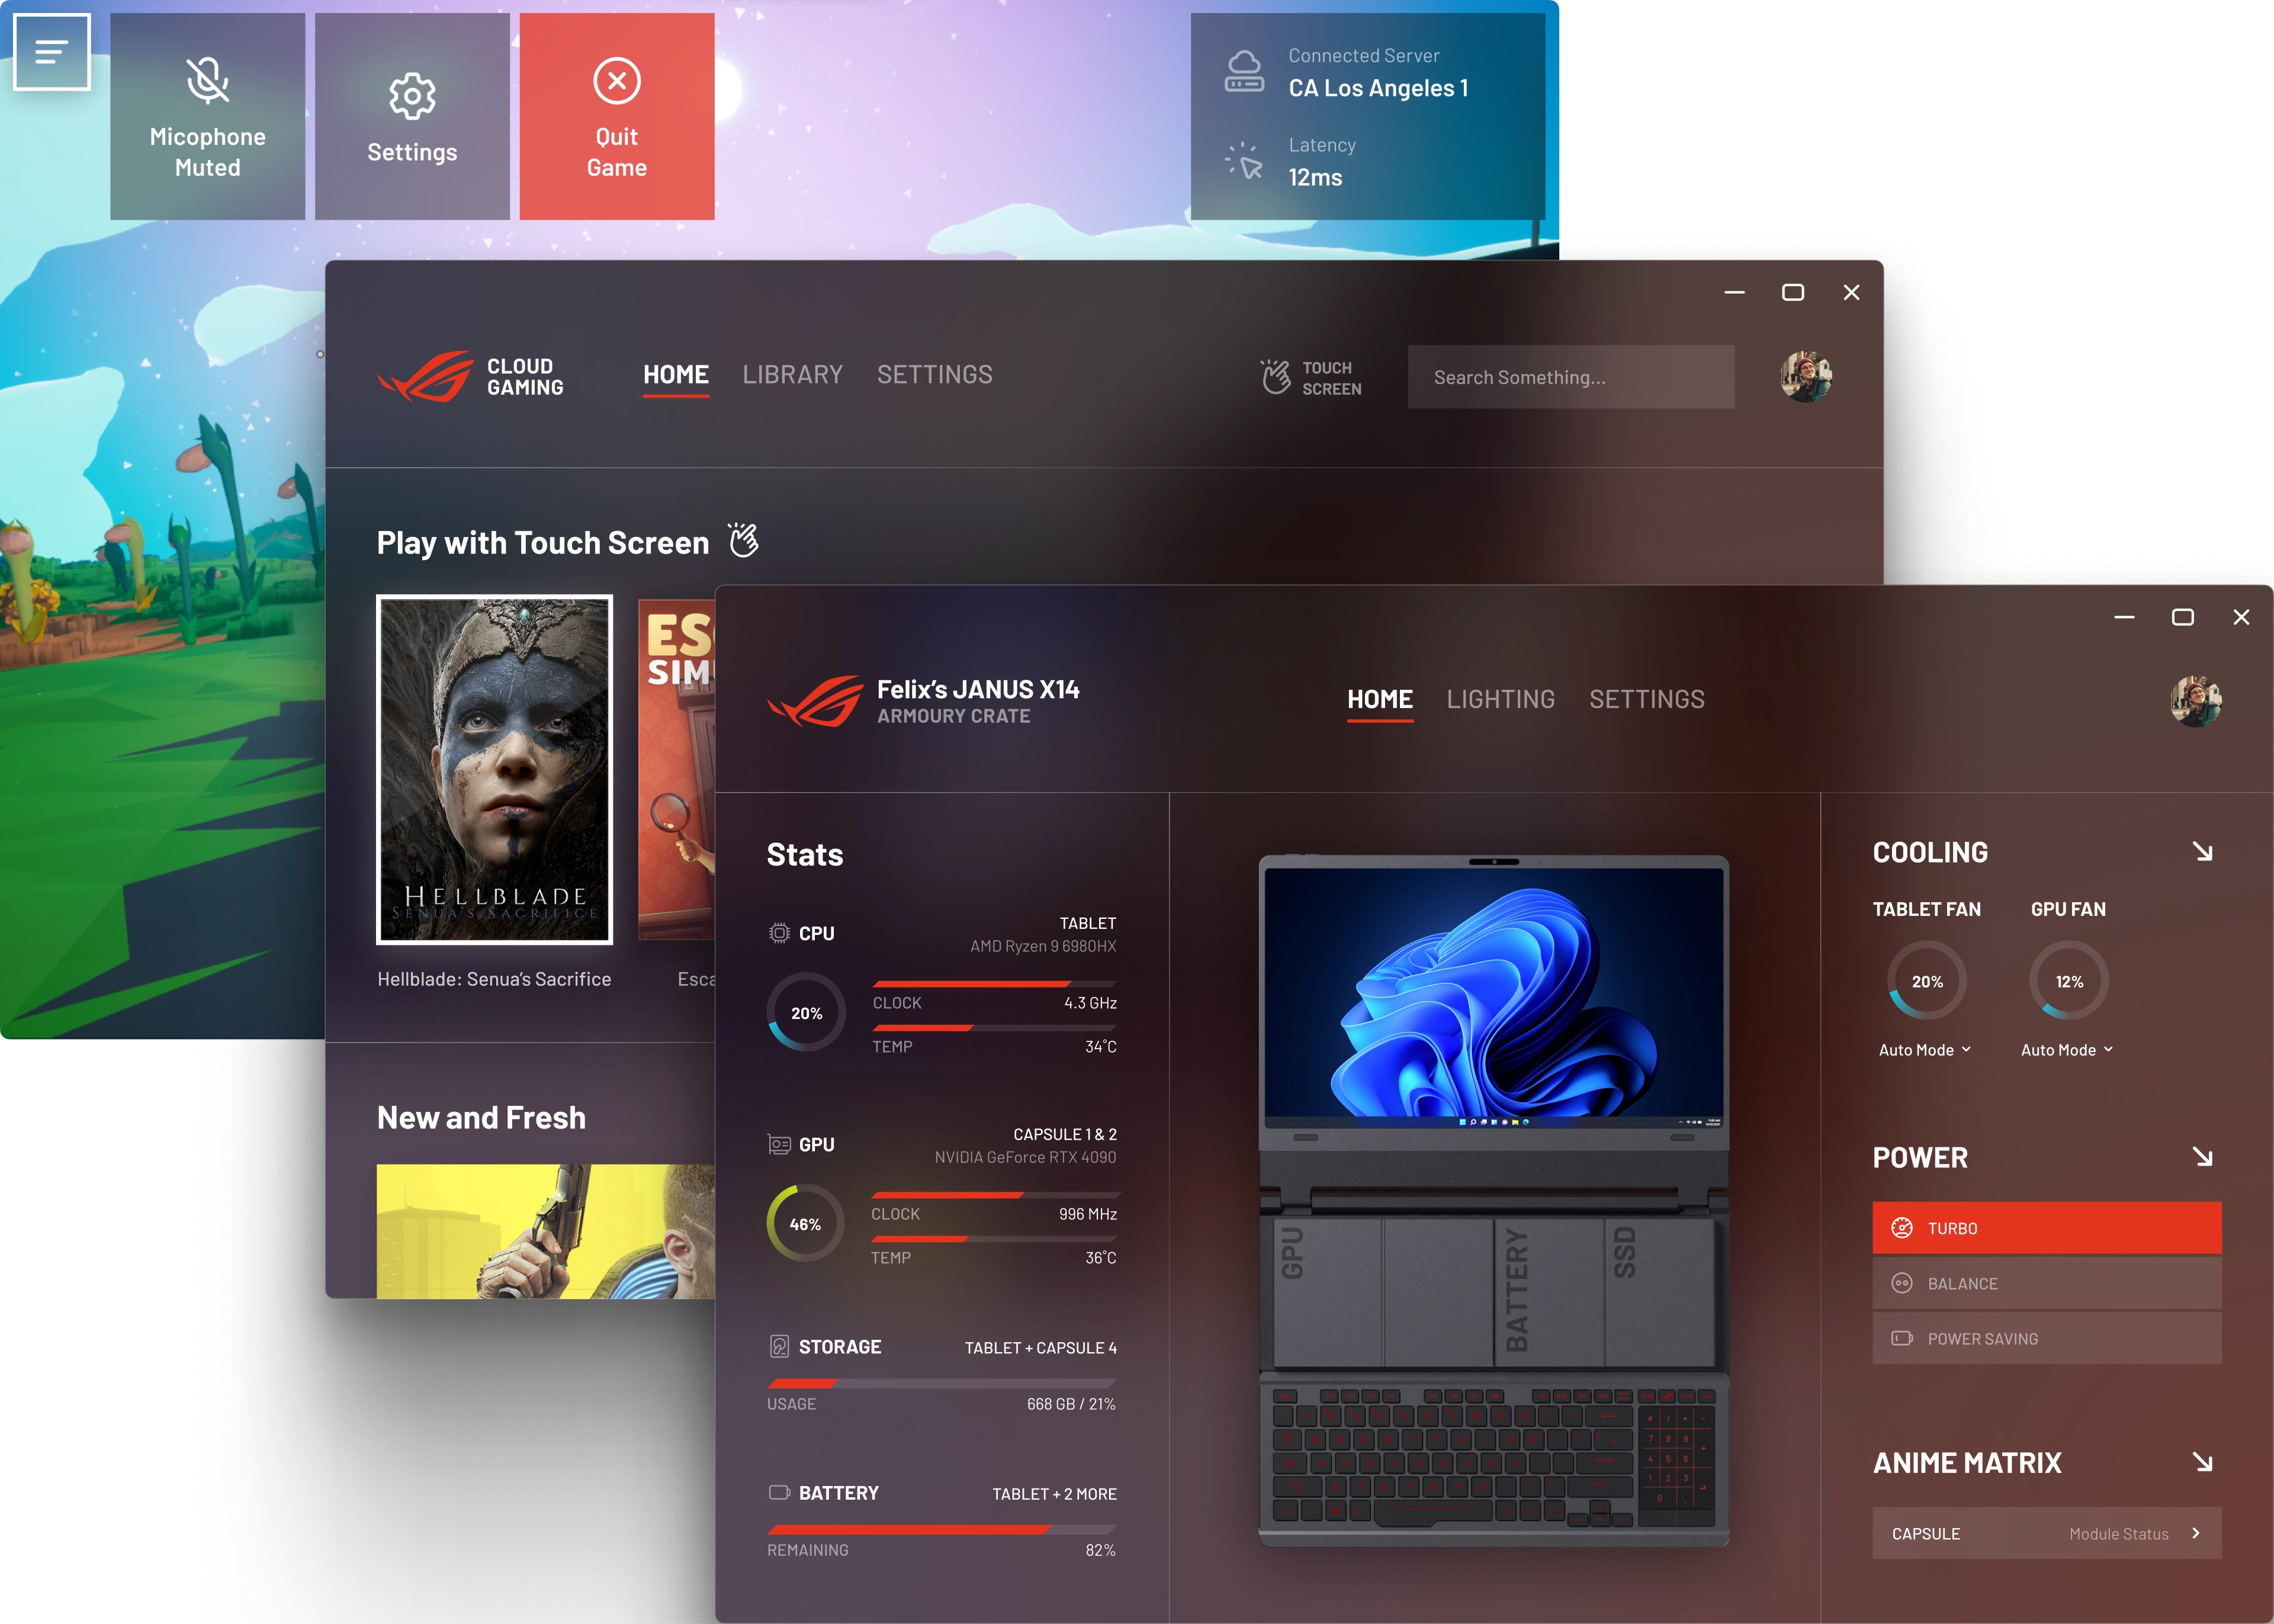 New software designed for Project Janus, including the new ROG Armoury Crate, the new ROG Cloud Gaming Services, and its on-screen controls.